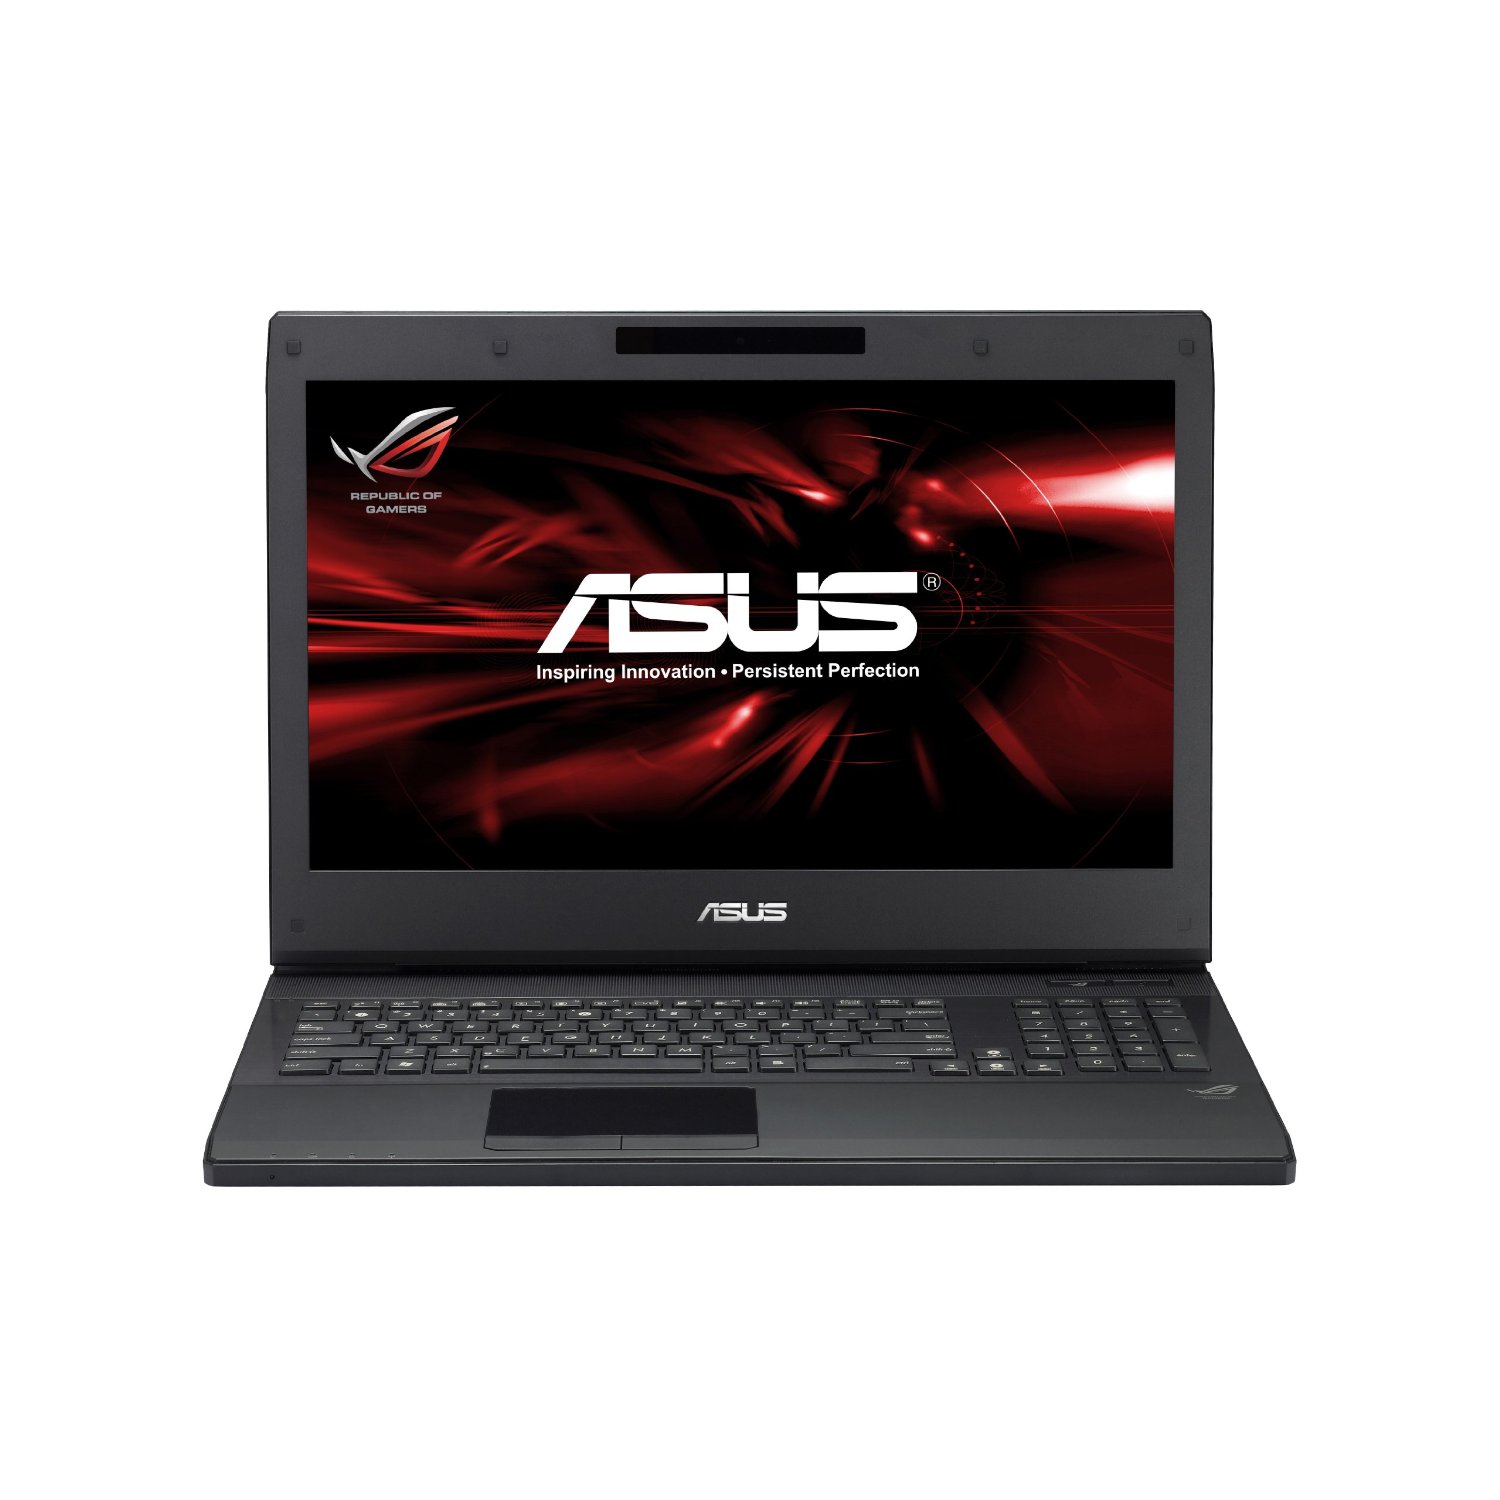 http://thetechjournal.com/wp-content/uploads/images/1109/1315217504-asus-new-g74sxa1-173inch-gaming-laptop-1.jpg